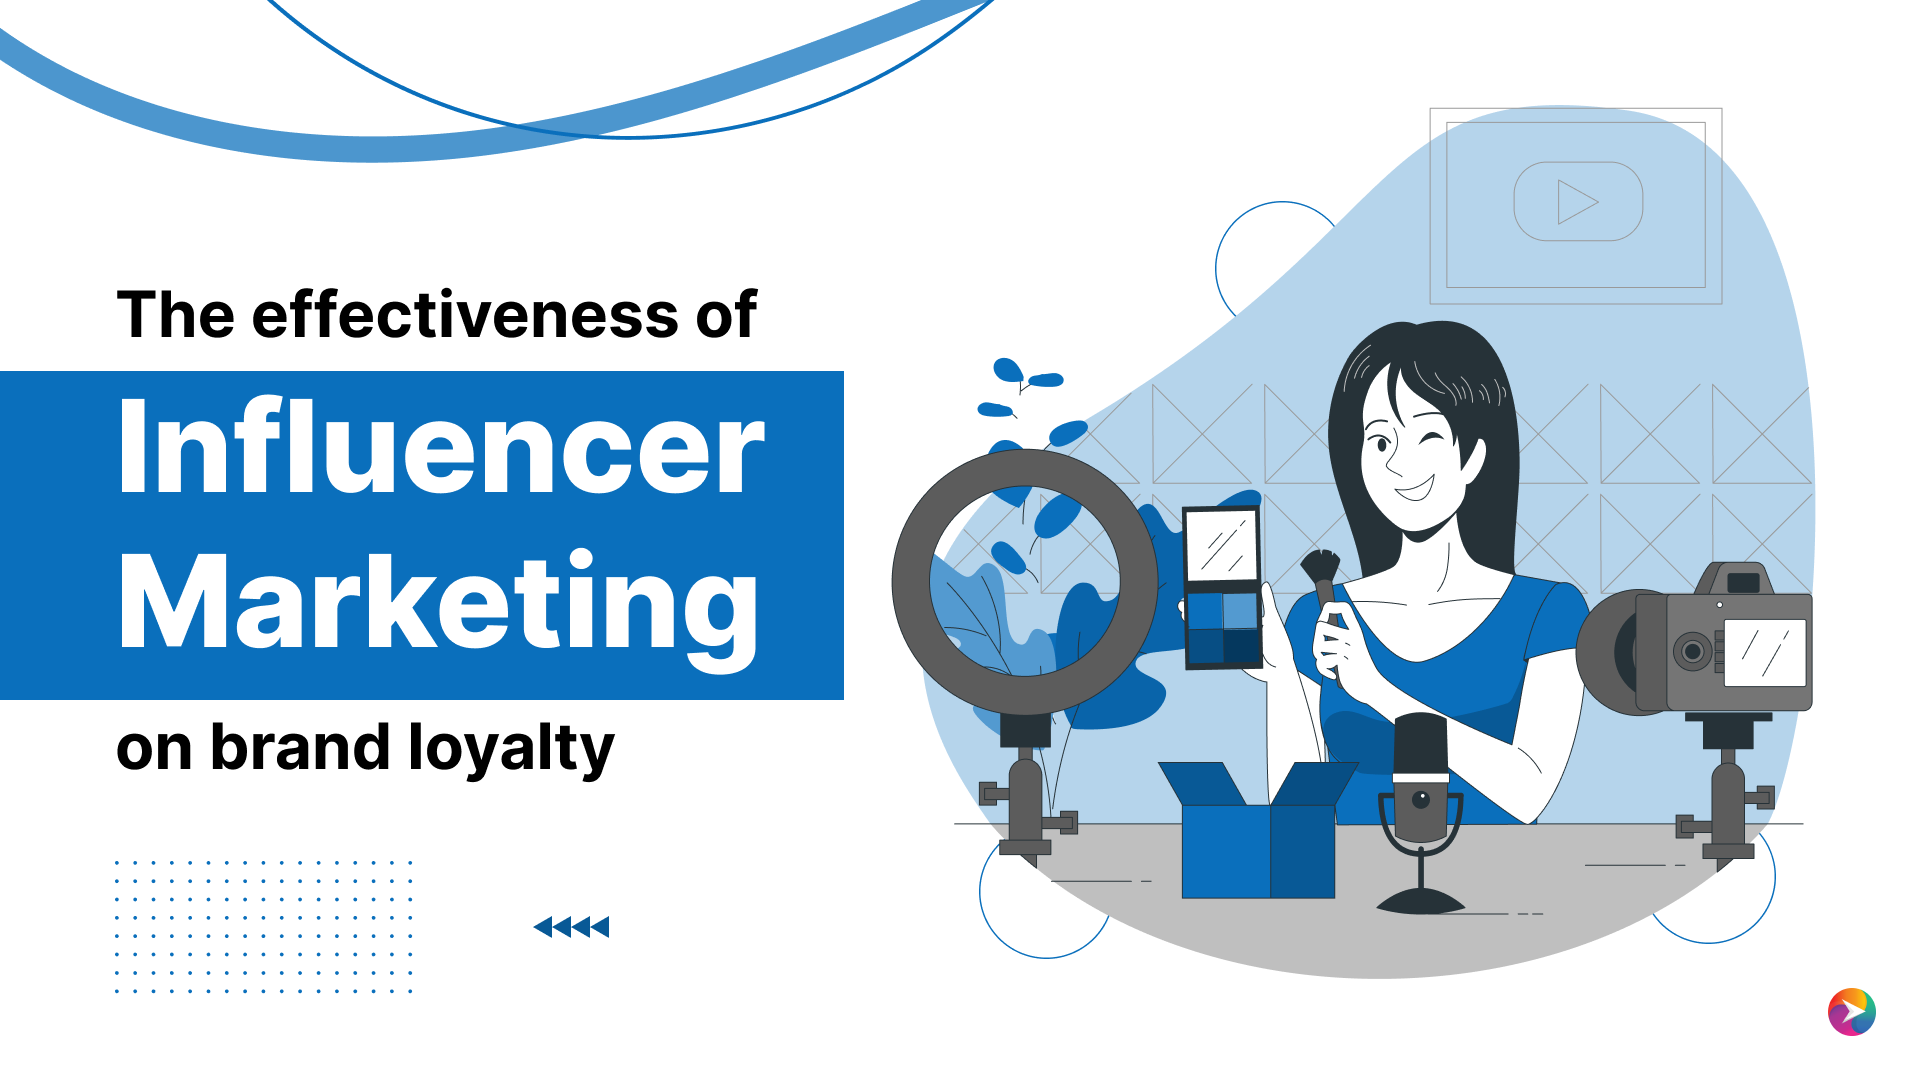 The effectiveness of Influencer Marketing on brand loyalty